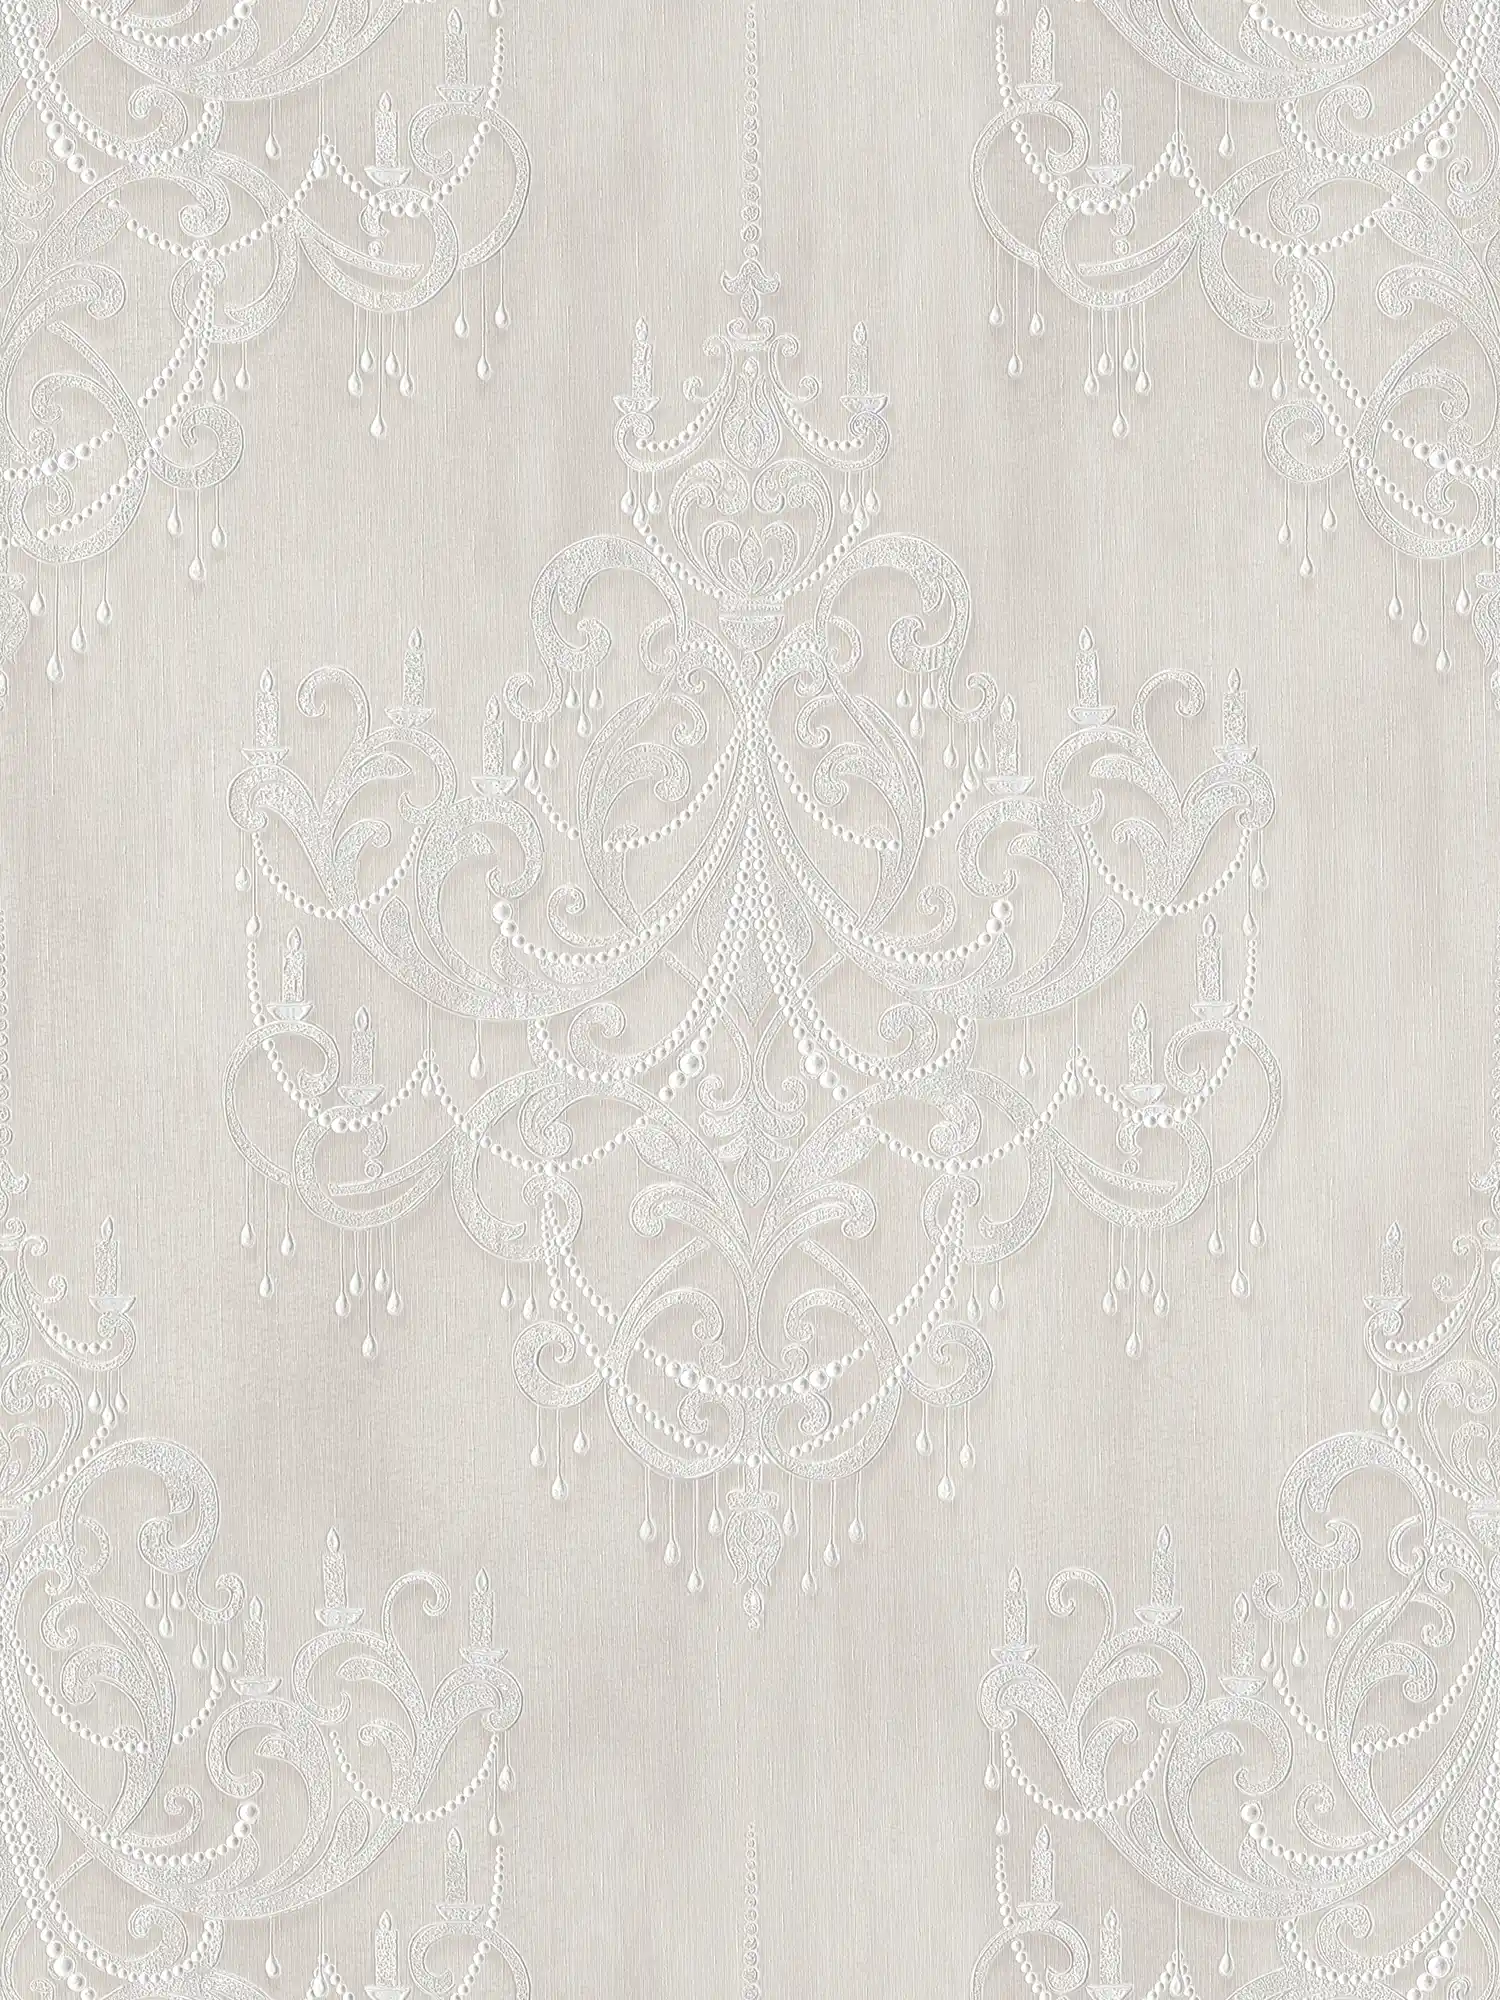 Ornament wallpaper champagne with pearl pattern - cream
